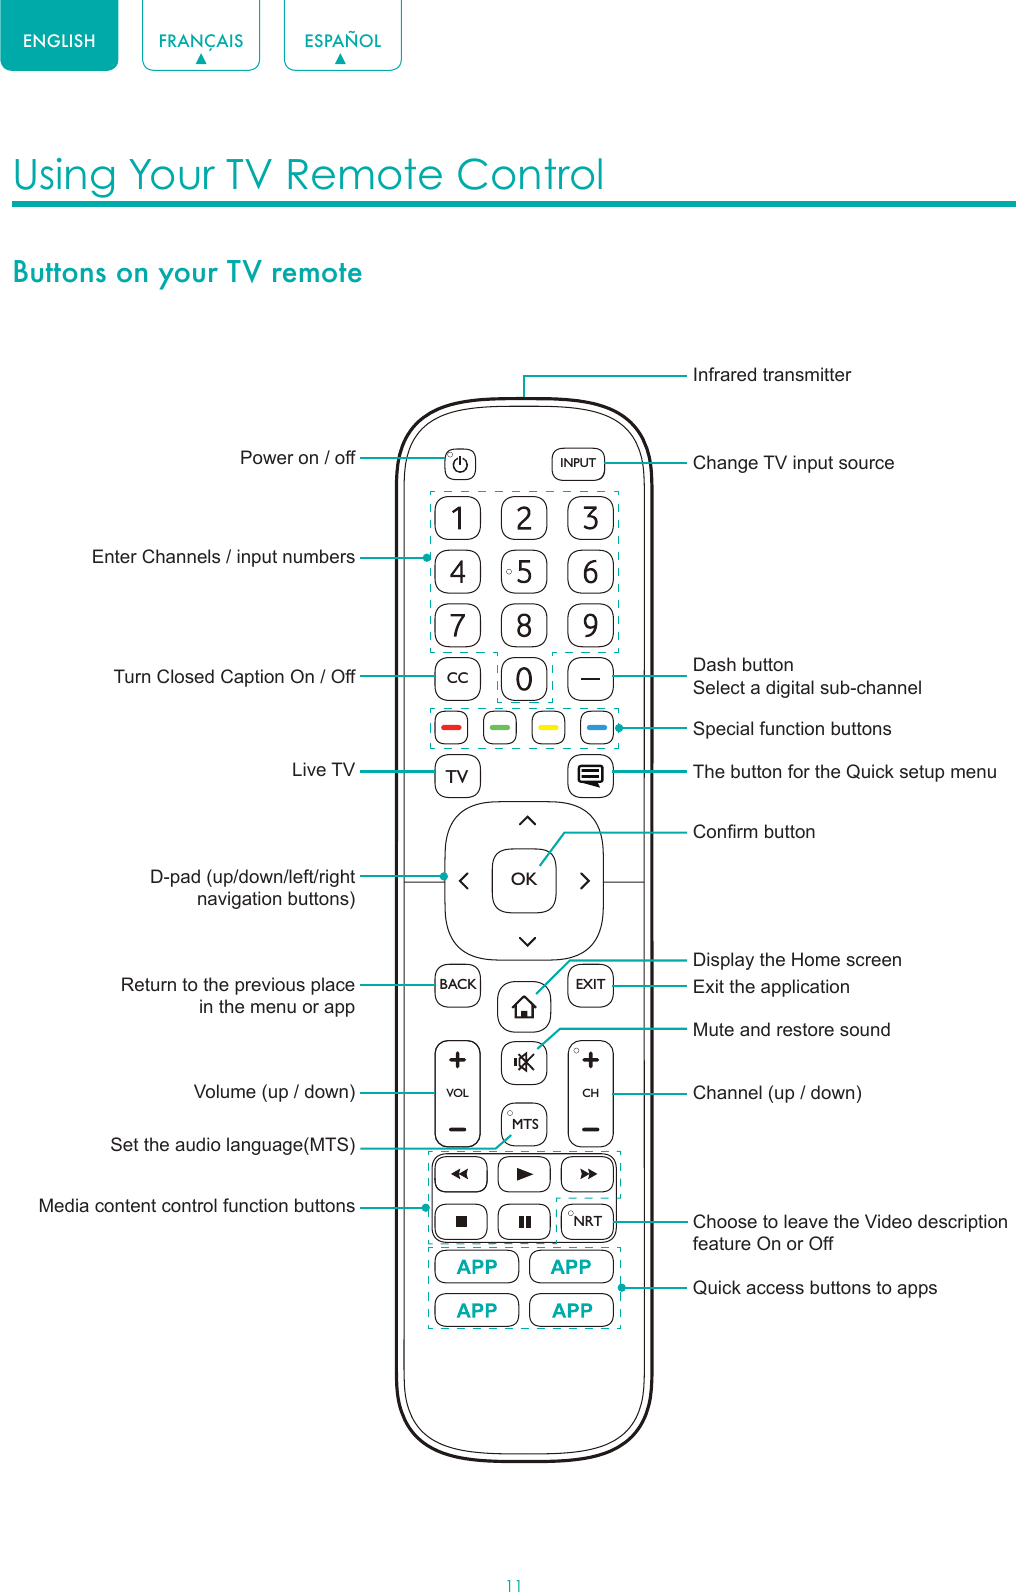 11ENGLISH FRANÇAIS ESPAÑOLUsing Your TV Remote Control Buttons on your TV remoteVOLCHOKCCBACKTVEXITINPUTMTSNRTPower on / offEnter Channels / input numbersMedia content control function buttonsDash button Select a digital sub-channelD-pad (up/down/left/right navigation buttons)Volume (up / down)Set the audio language(MTS)Choose to leave the Video description feature On or OffLive TVReturn to the previous place in the menu or appMute and restore soundInfrared transmitterChange TV input sourceChannel (up / down)Exit the applicationTurn Closed Caption On / OffSpecial function buttonsThe button for the Quick setup menuDisplay the Home screenConrm buttonQuick access buttons to apps